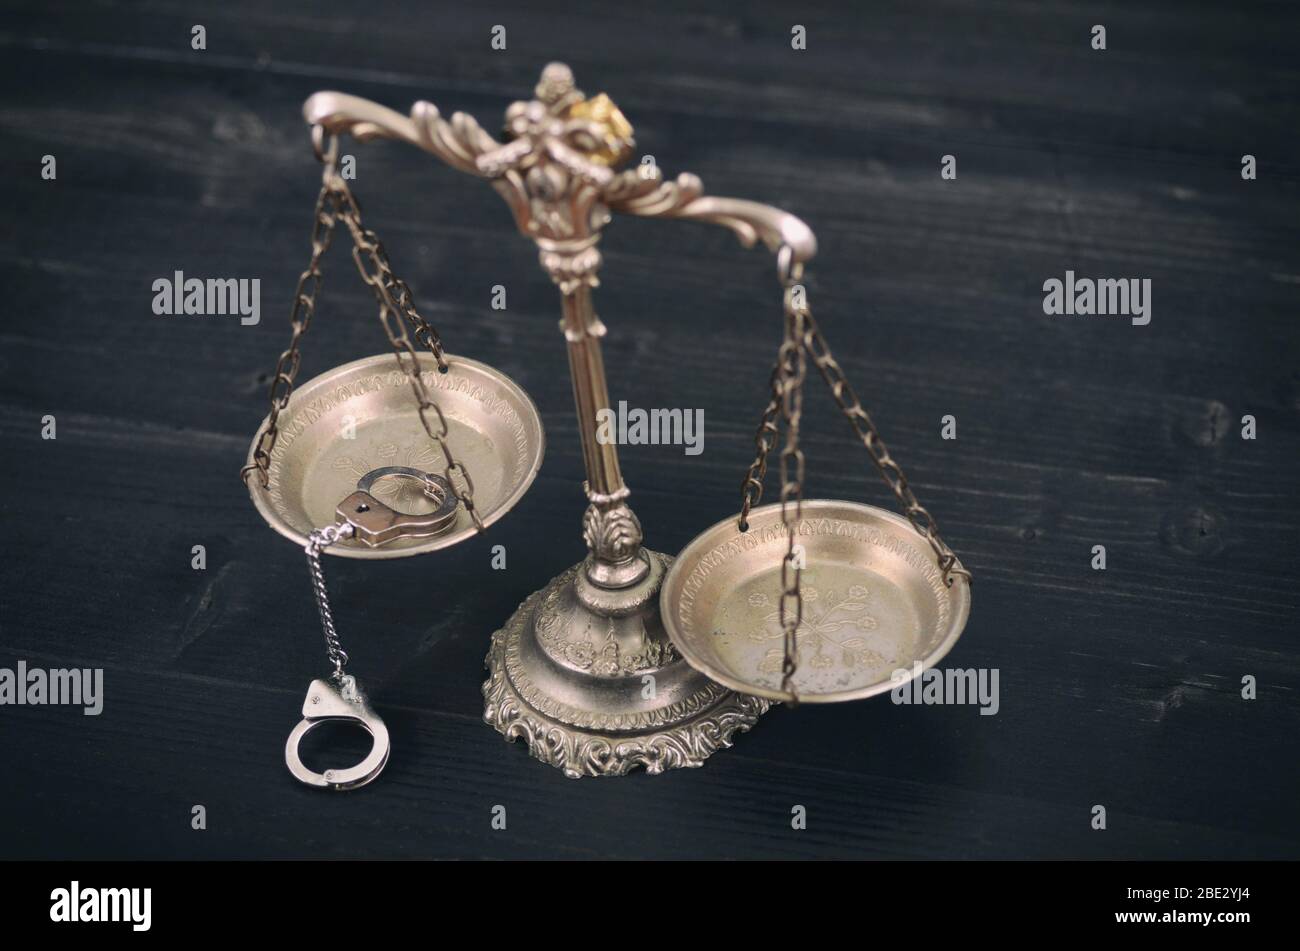 Law and Justice, Legality concept, Scales of Justice and handcuffs on a black wooden background. Stock Photo